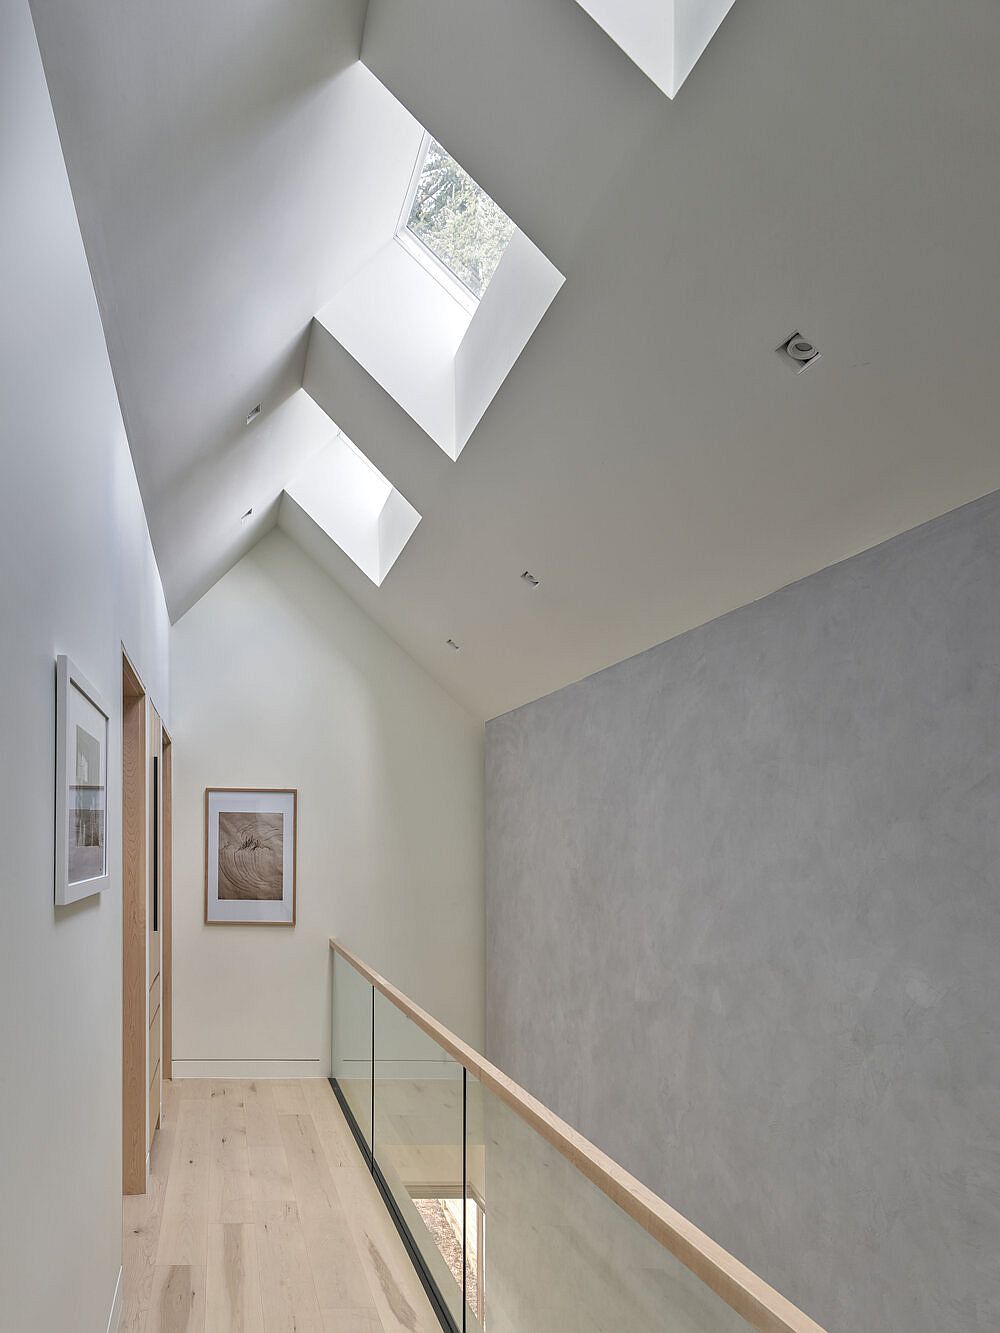 Series of skylights on the upper level bring ample natural light into the minimal, multi-level interior